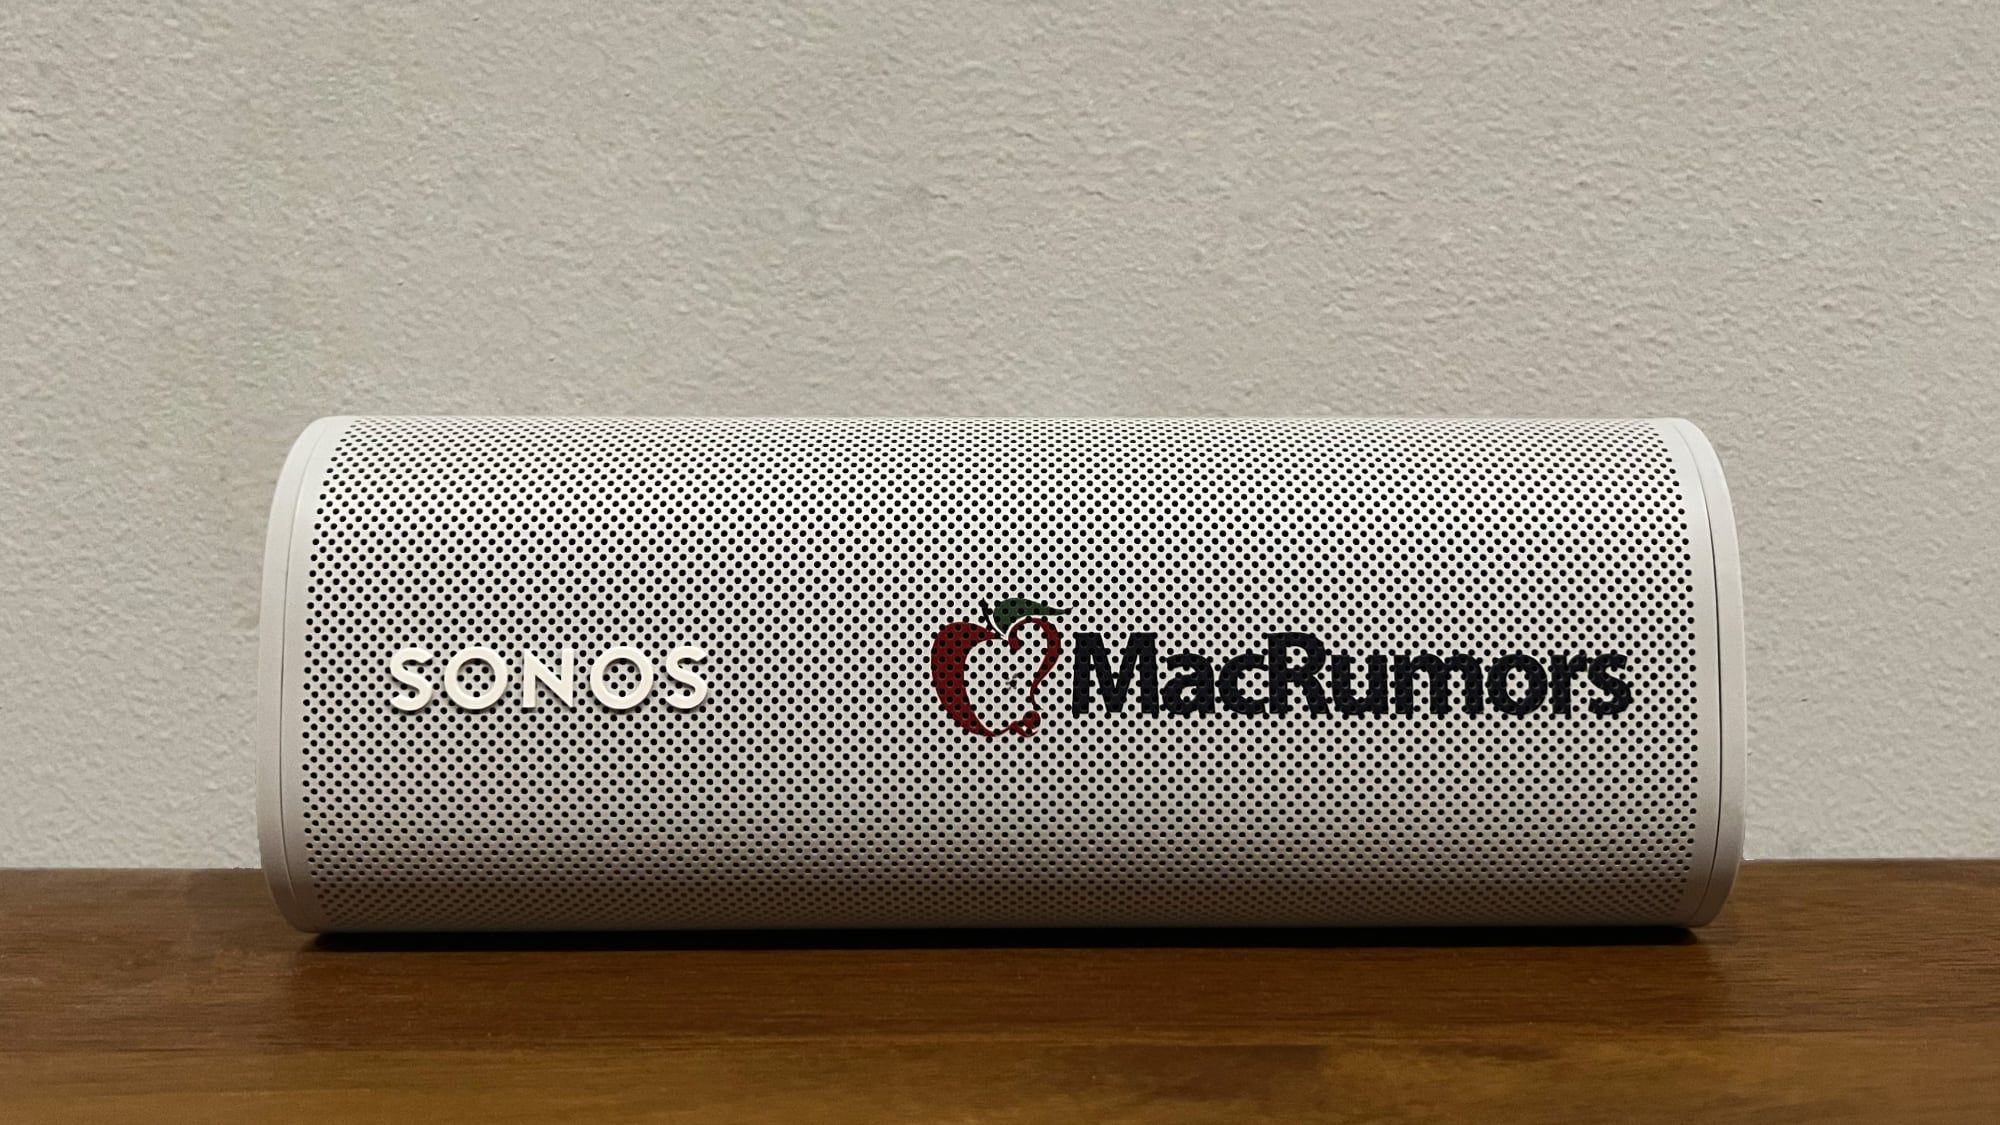 MacRumors Giveaway: Win a Customized Sonos Roam Speaker From Electronic Finishing Solutions